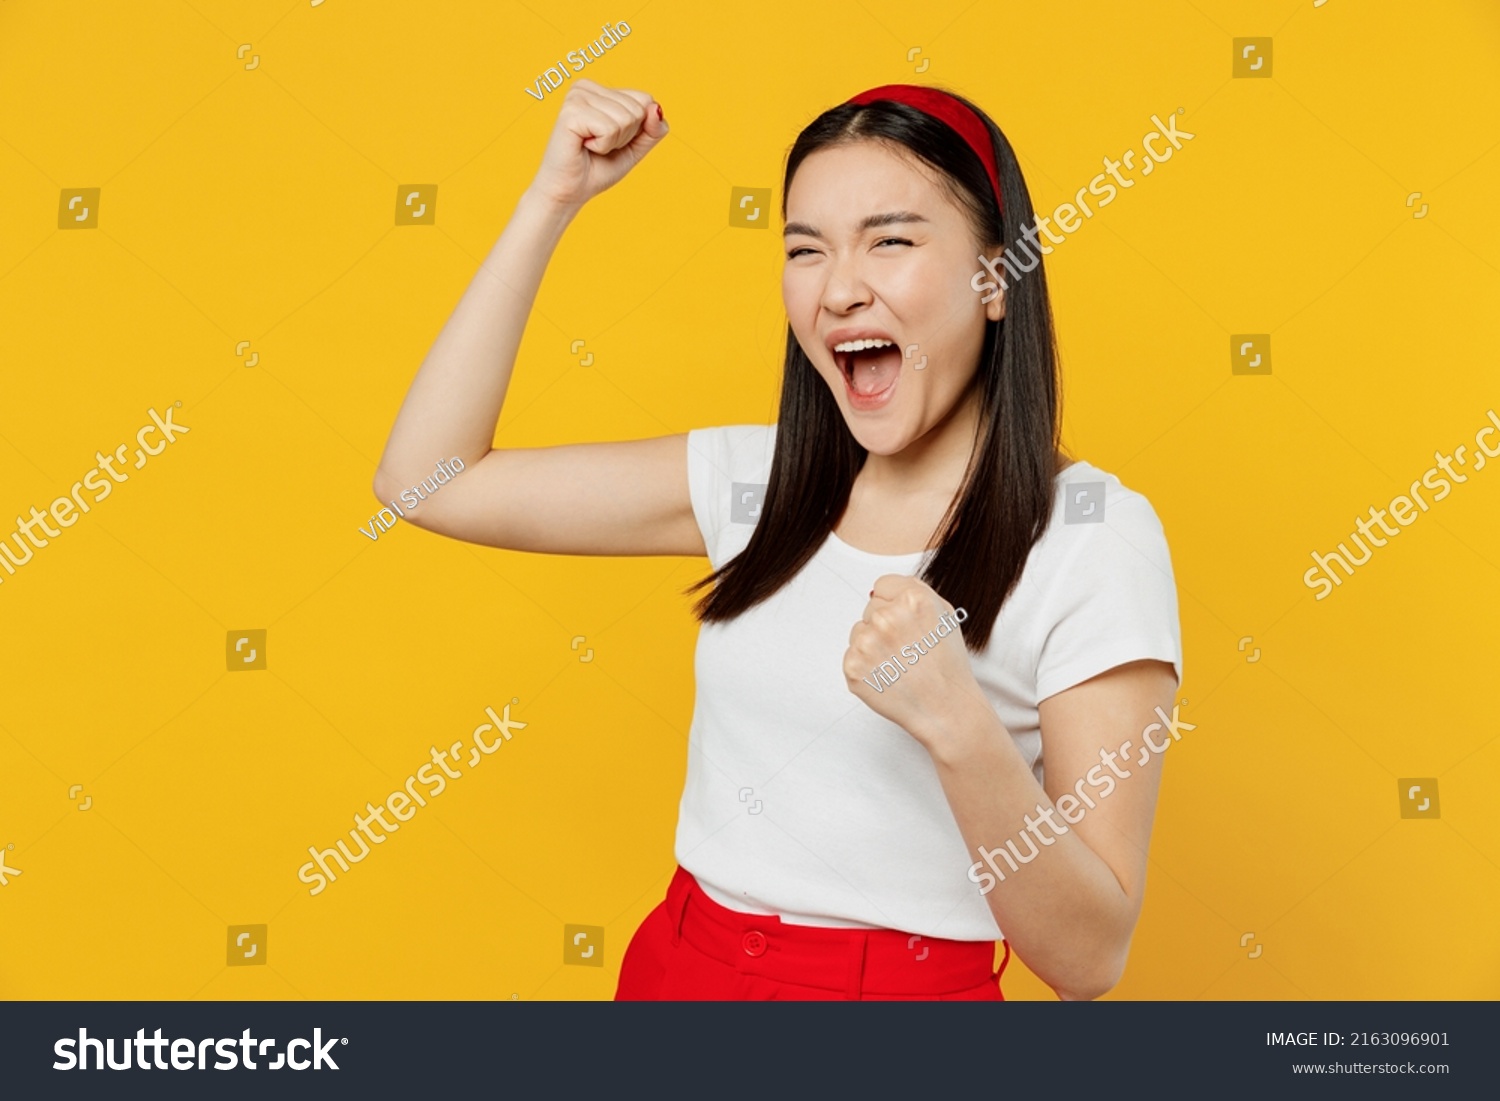 Happy fun excited jubilant young woman of Asian ethnicity 20s years old wears white t-shirt doing winner gesture celebrate clenching fists say yes isolated on plain yellow background studio portrait #2163096901